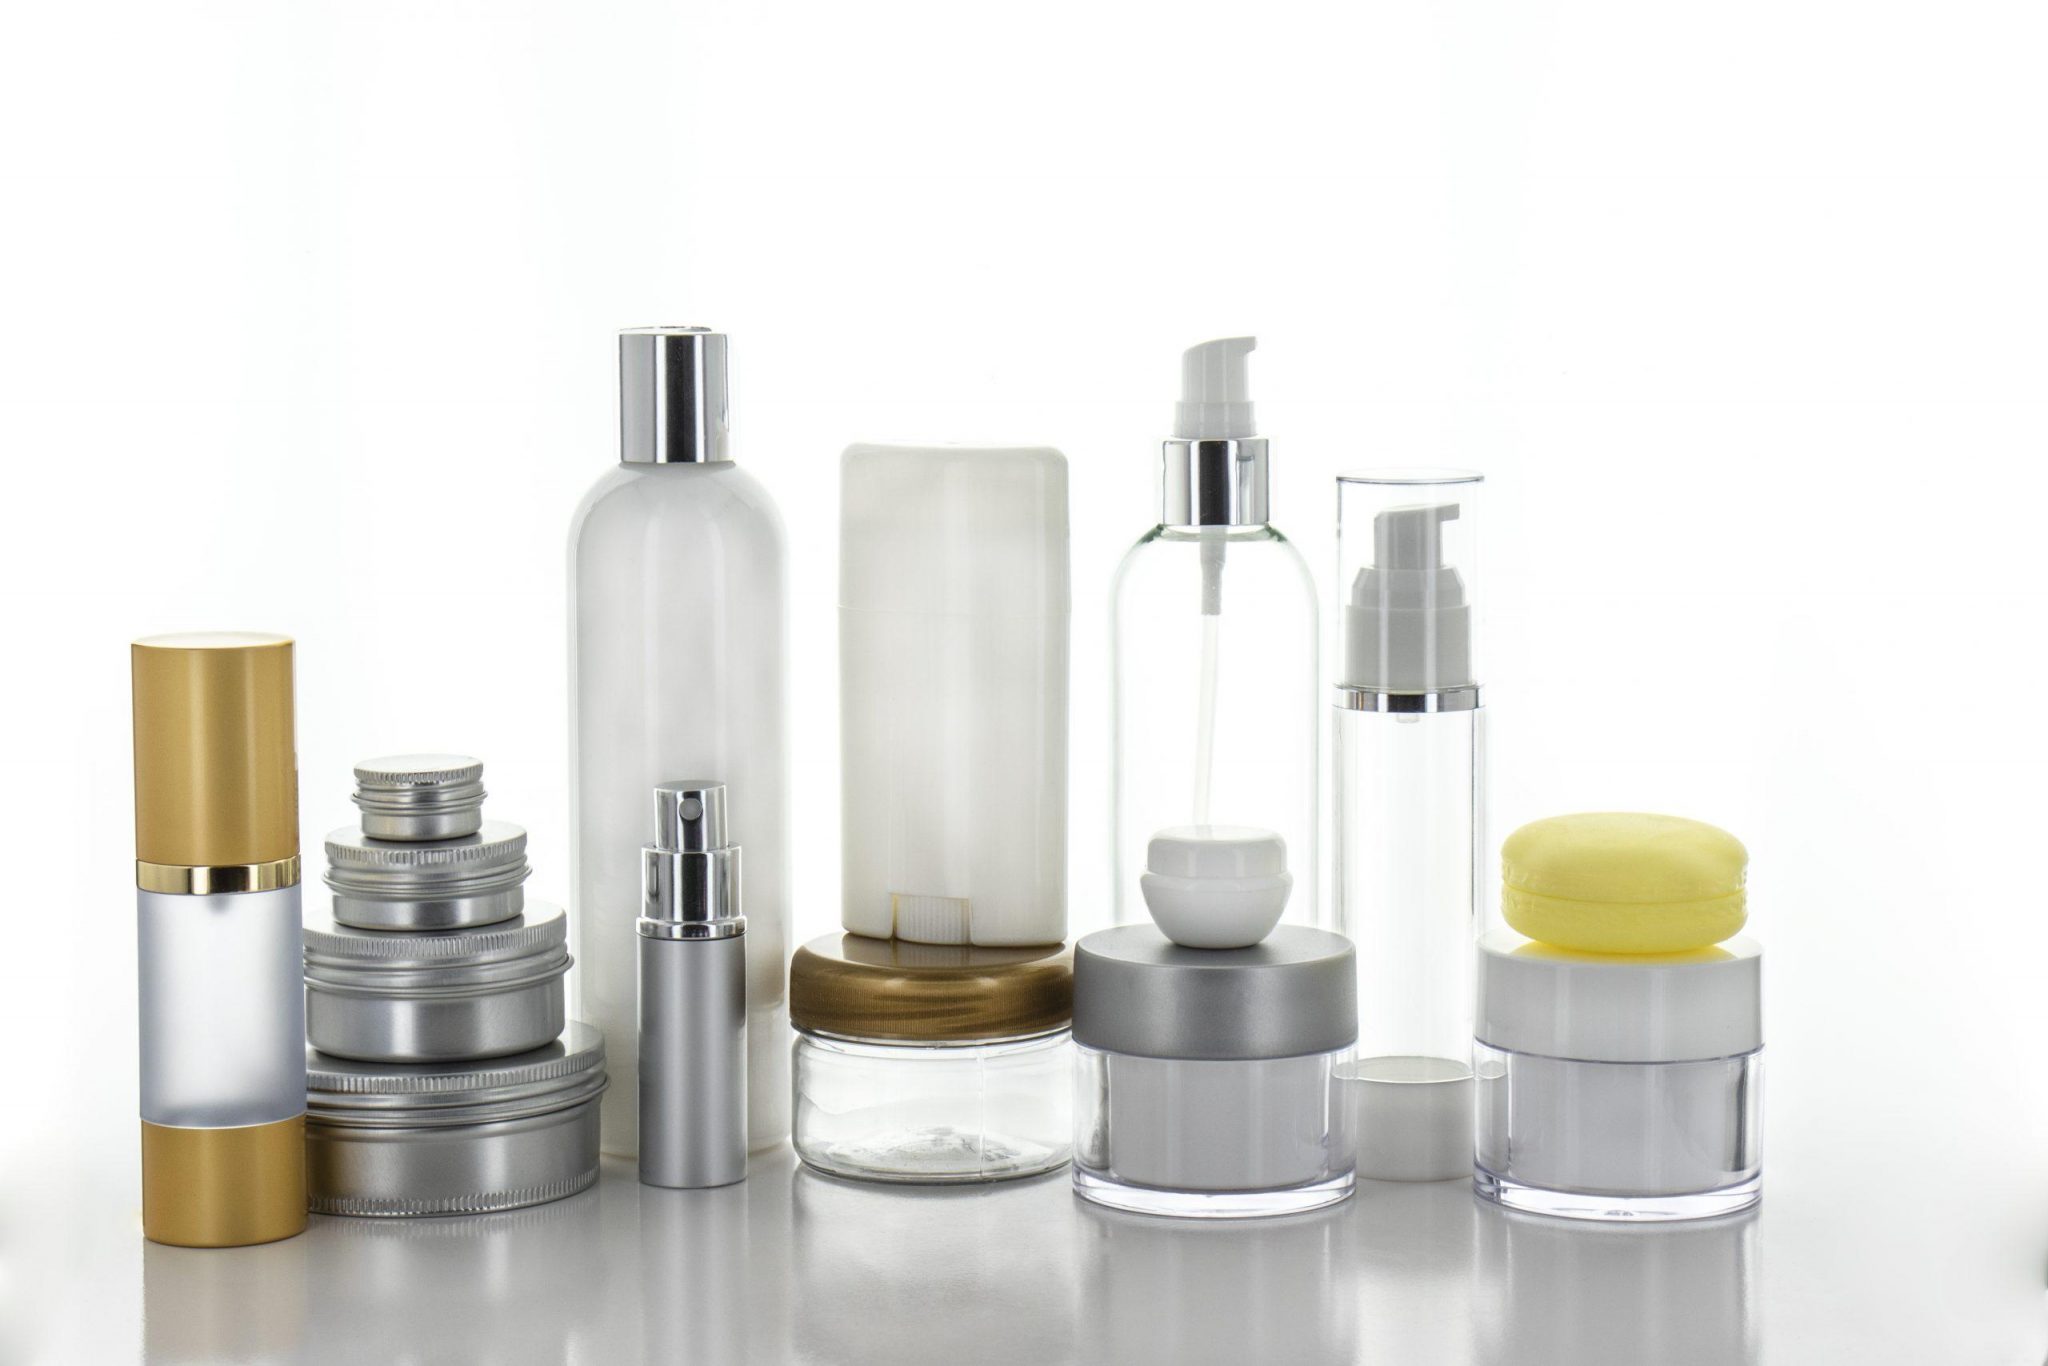 When we think about cosmetic packaging options, tubes are also quite common for creams, lotions, etc. While jars require more horizontal space to store, tubes are ideal for using space vertically. If you have a product which would benefit from the latter, then a nice flexible tube would be a great choice. Our products can be used to package cosmetic creams, lipsticks, shoe cleaners and any other cream or paste which can fit into a tube. Tubes are ideal for those products, which need to be used fast and easily. No messing around. Tubes are a great choice for cosmetic packaging because you only really need to worry about the size. When it comes to tubes, they are not that customizable in shape, so they might not be ideal for really clever and flashy products. Tubes are great for those cosmetic applications, where a modest container will do a good job. When choosing tubes, it is beneficial to consider if you need any protective elements, such as foil or a twist off cap.